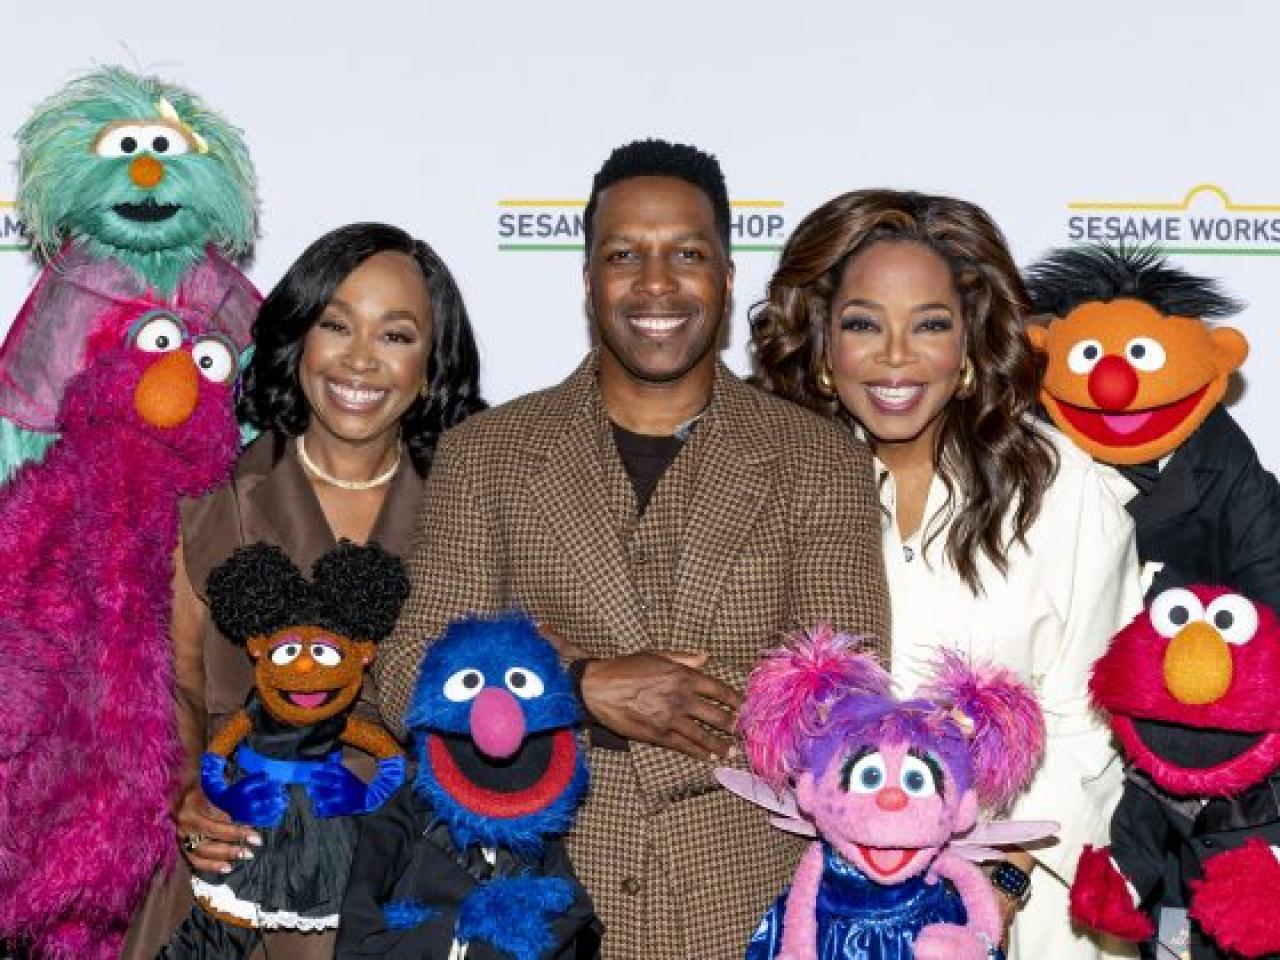 Three people and muppets posed together.